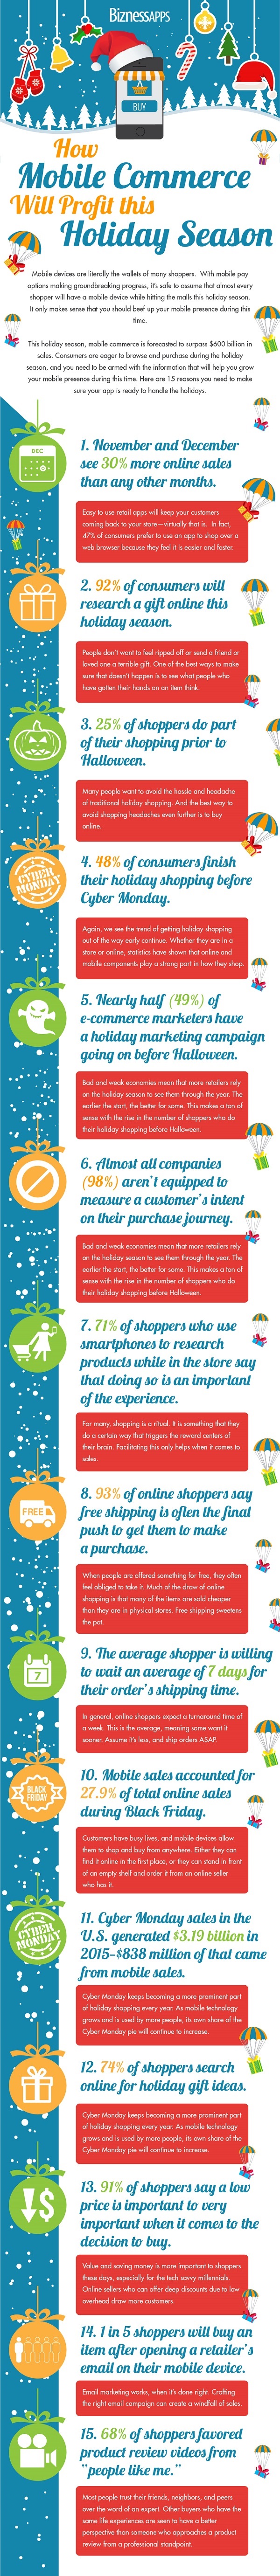 mobile-commerce-infographic1-002